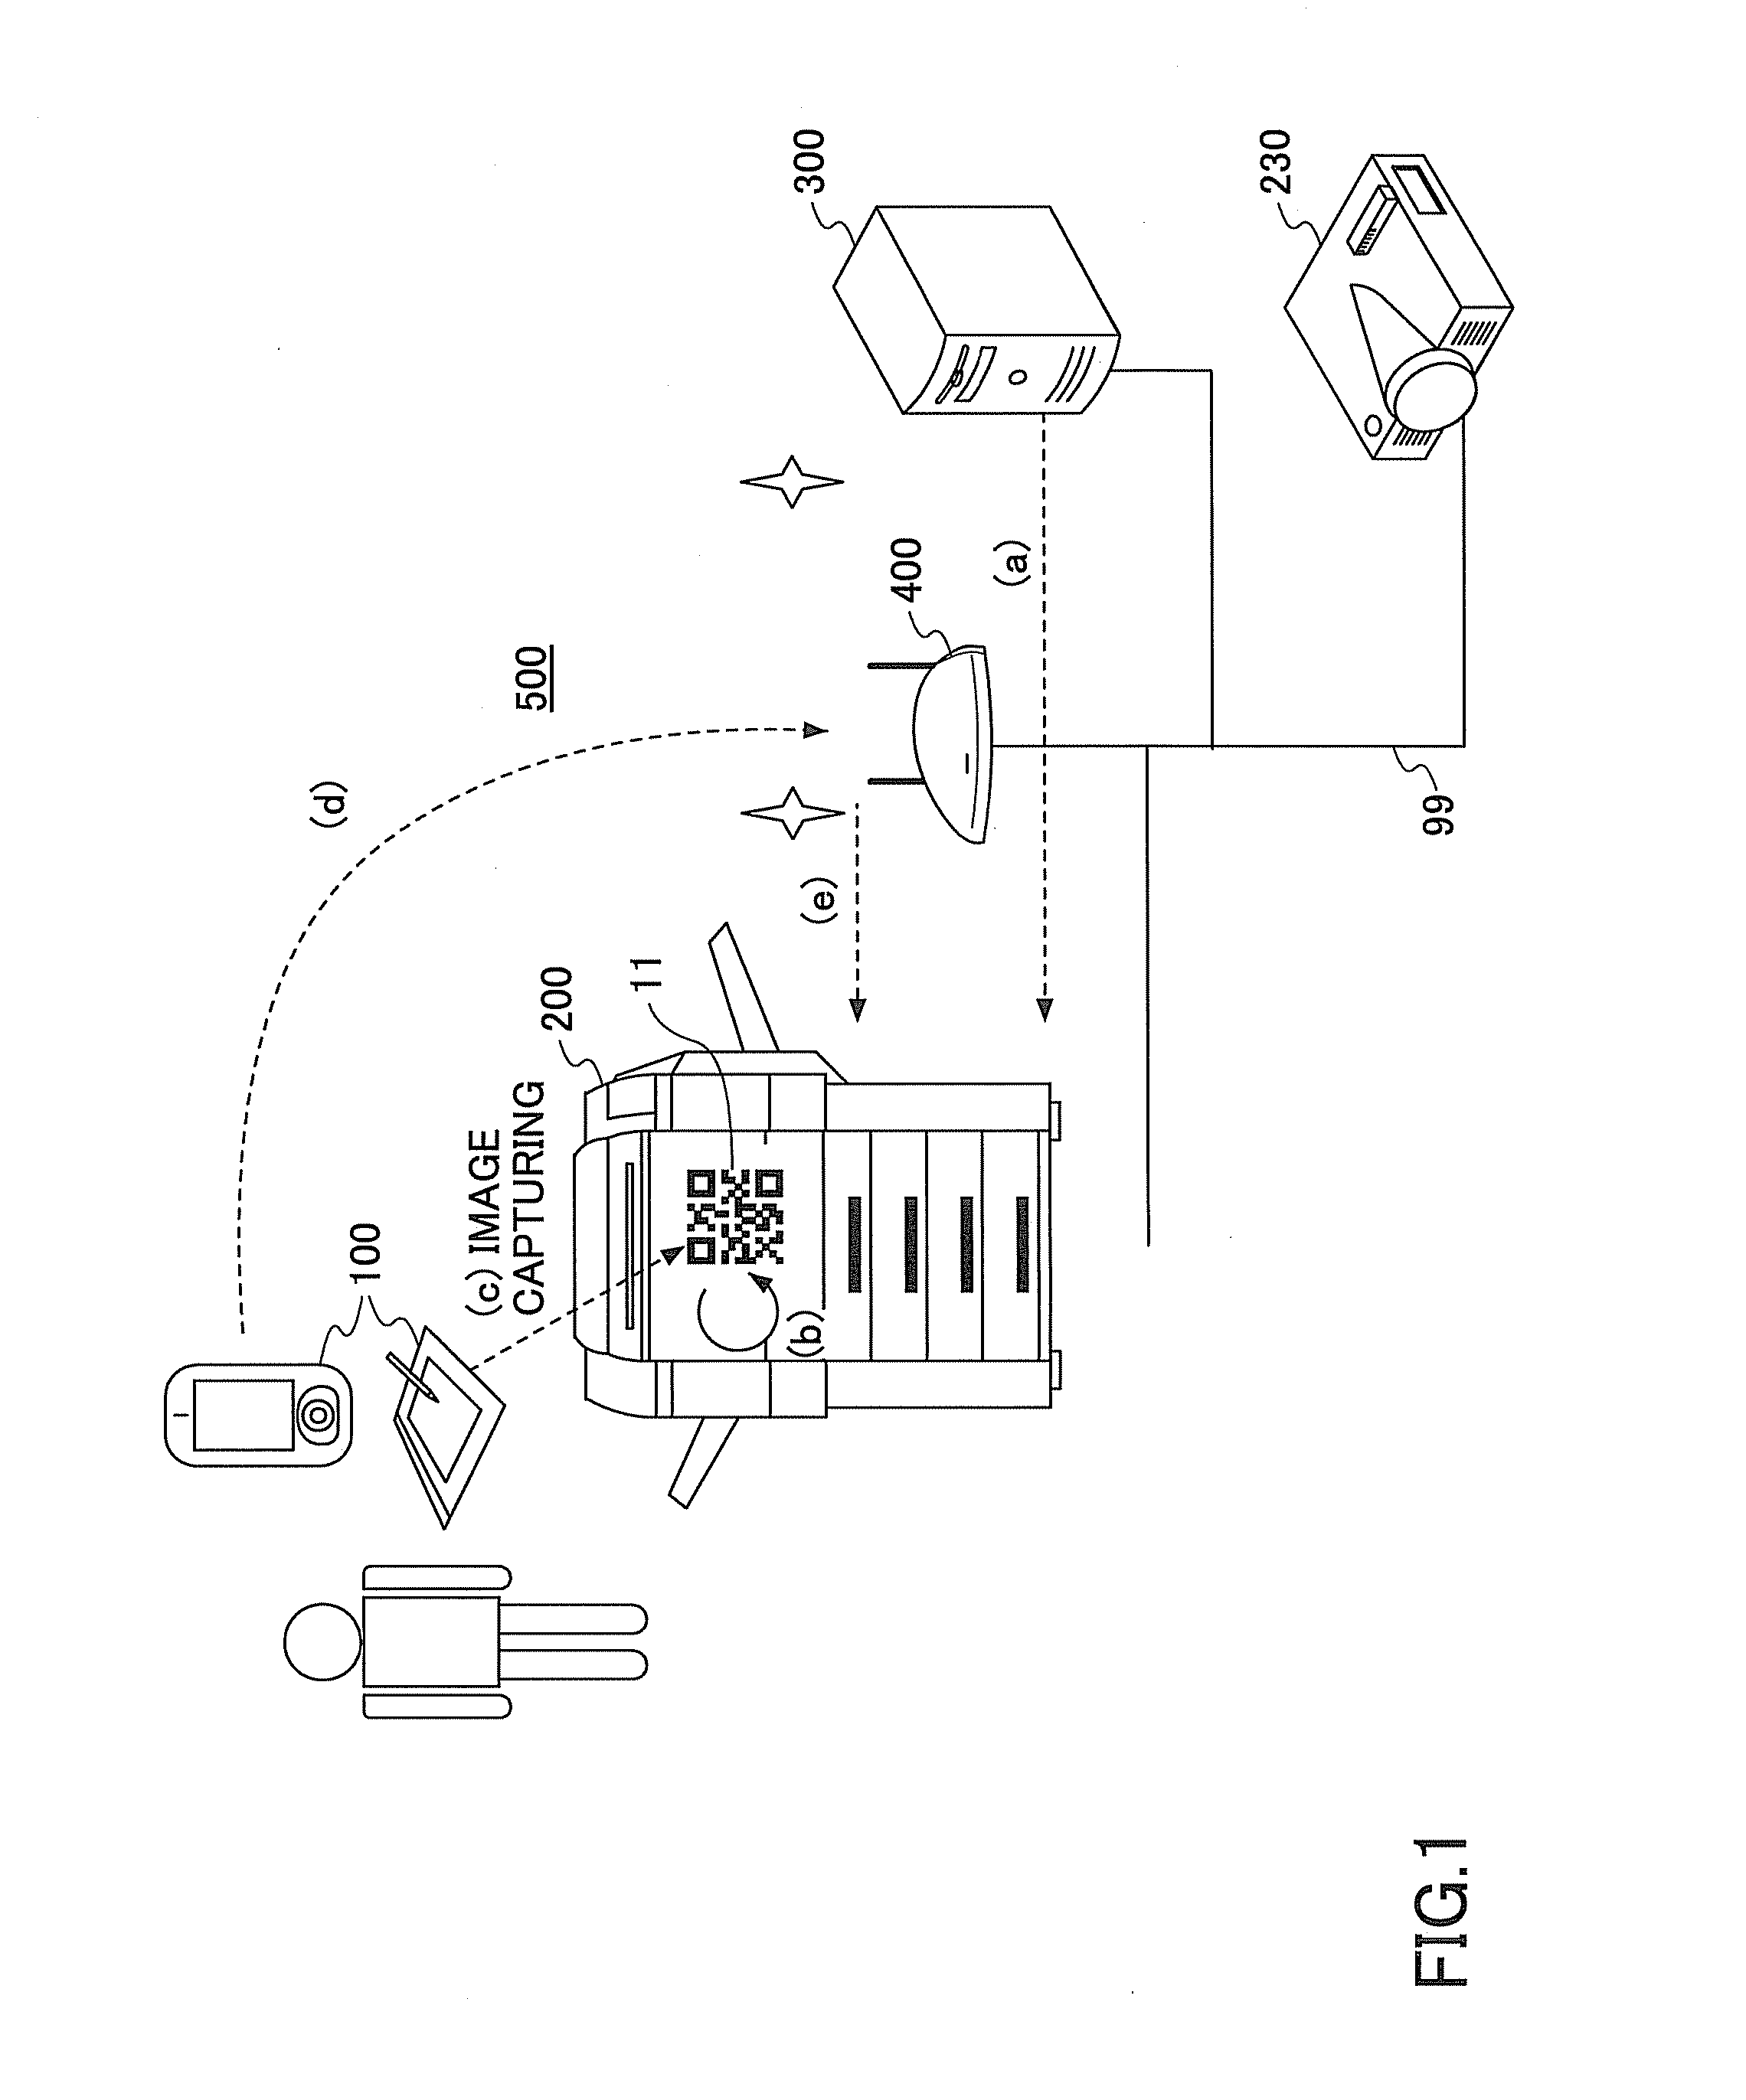 Arrangement for connecting to network in network system